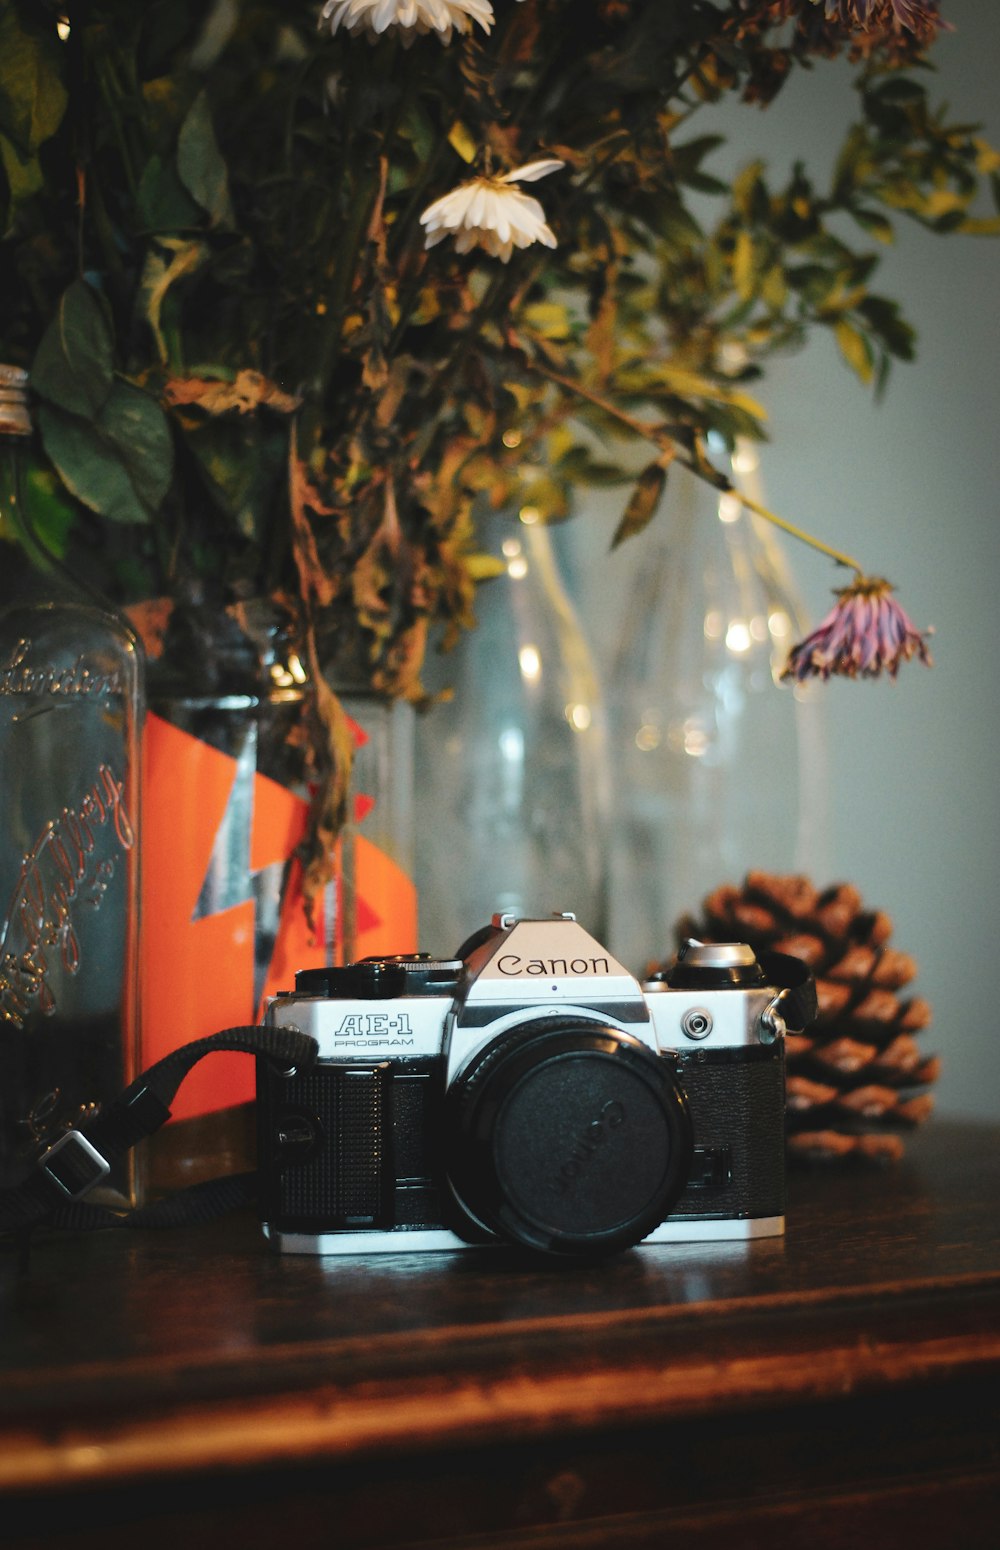 shallow focus photo of black and gray Canon SLR camera on brown wooden table